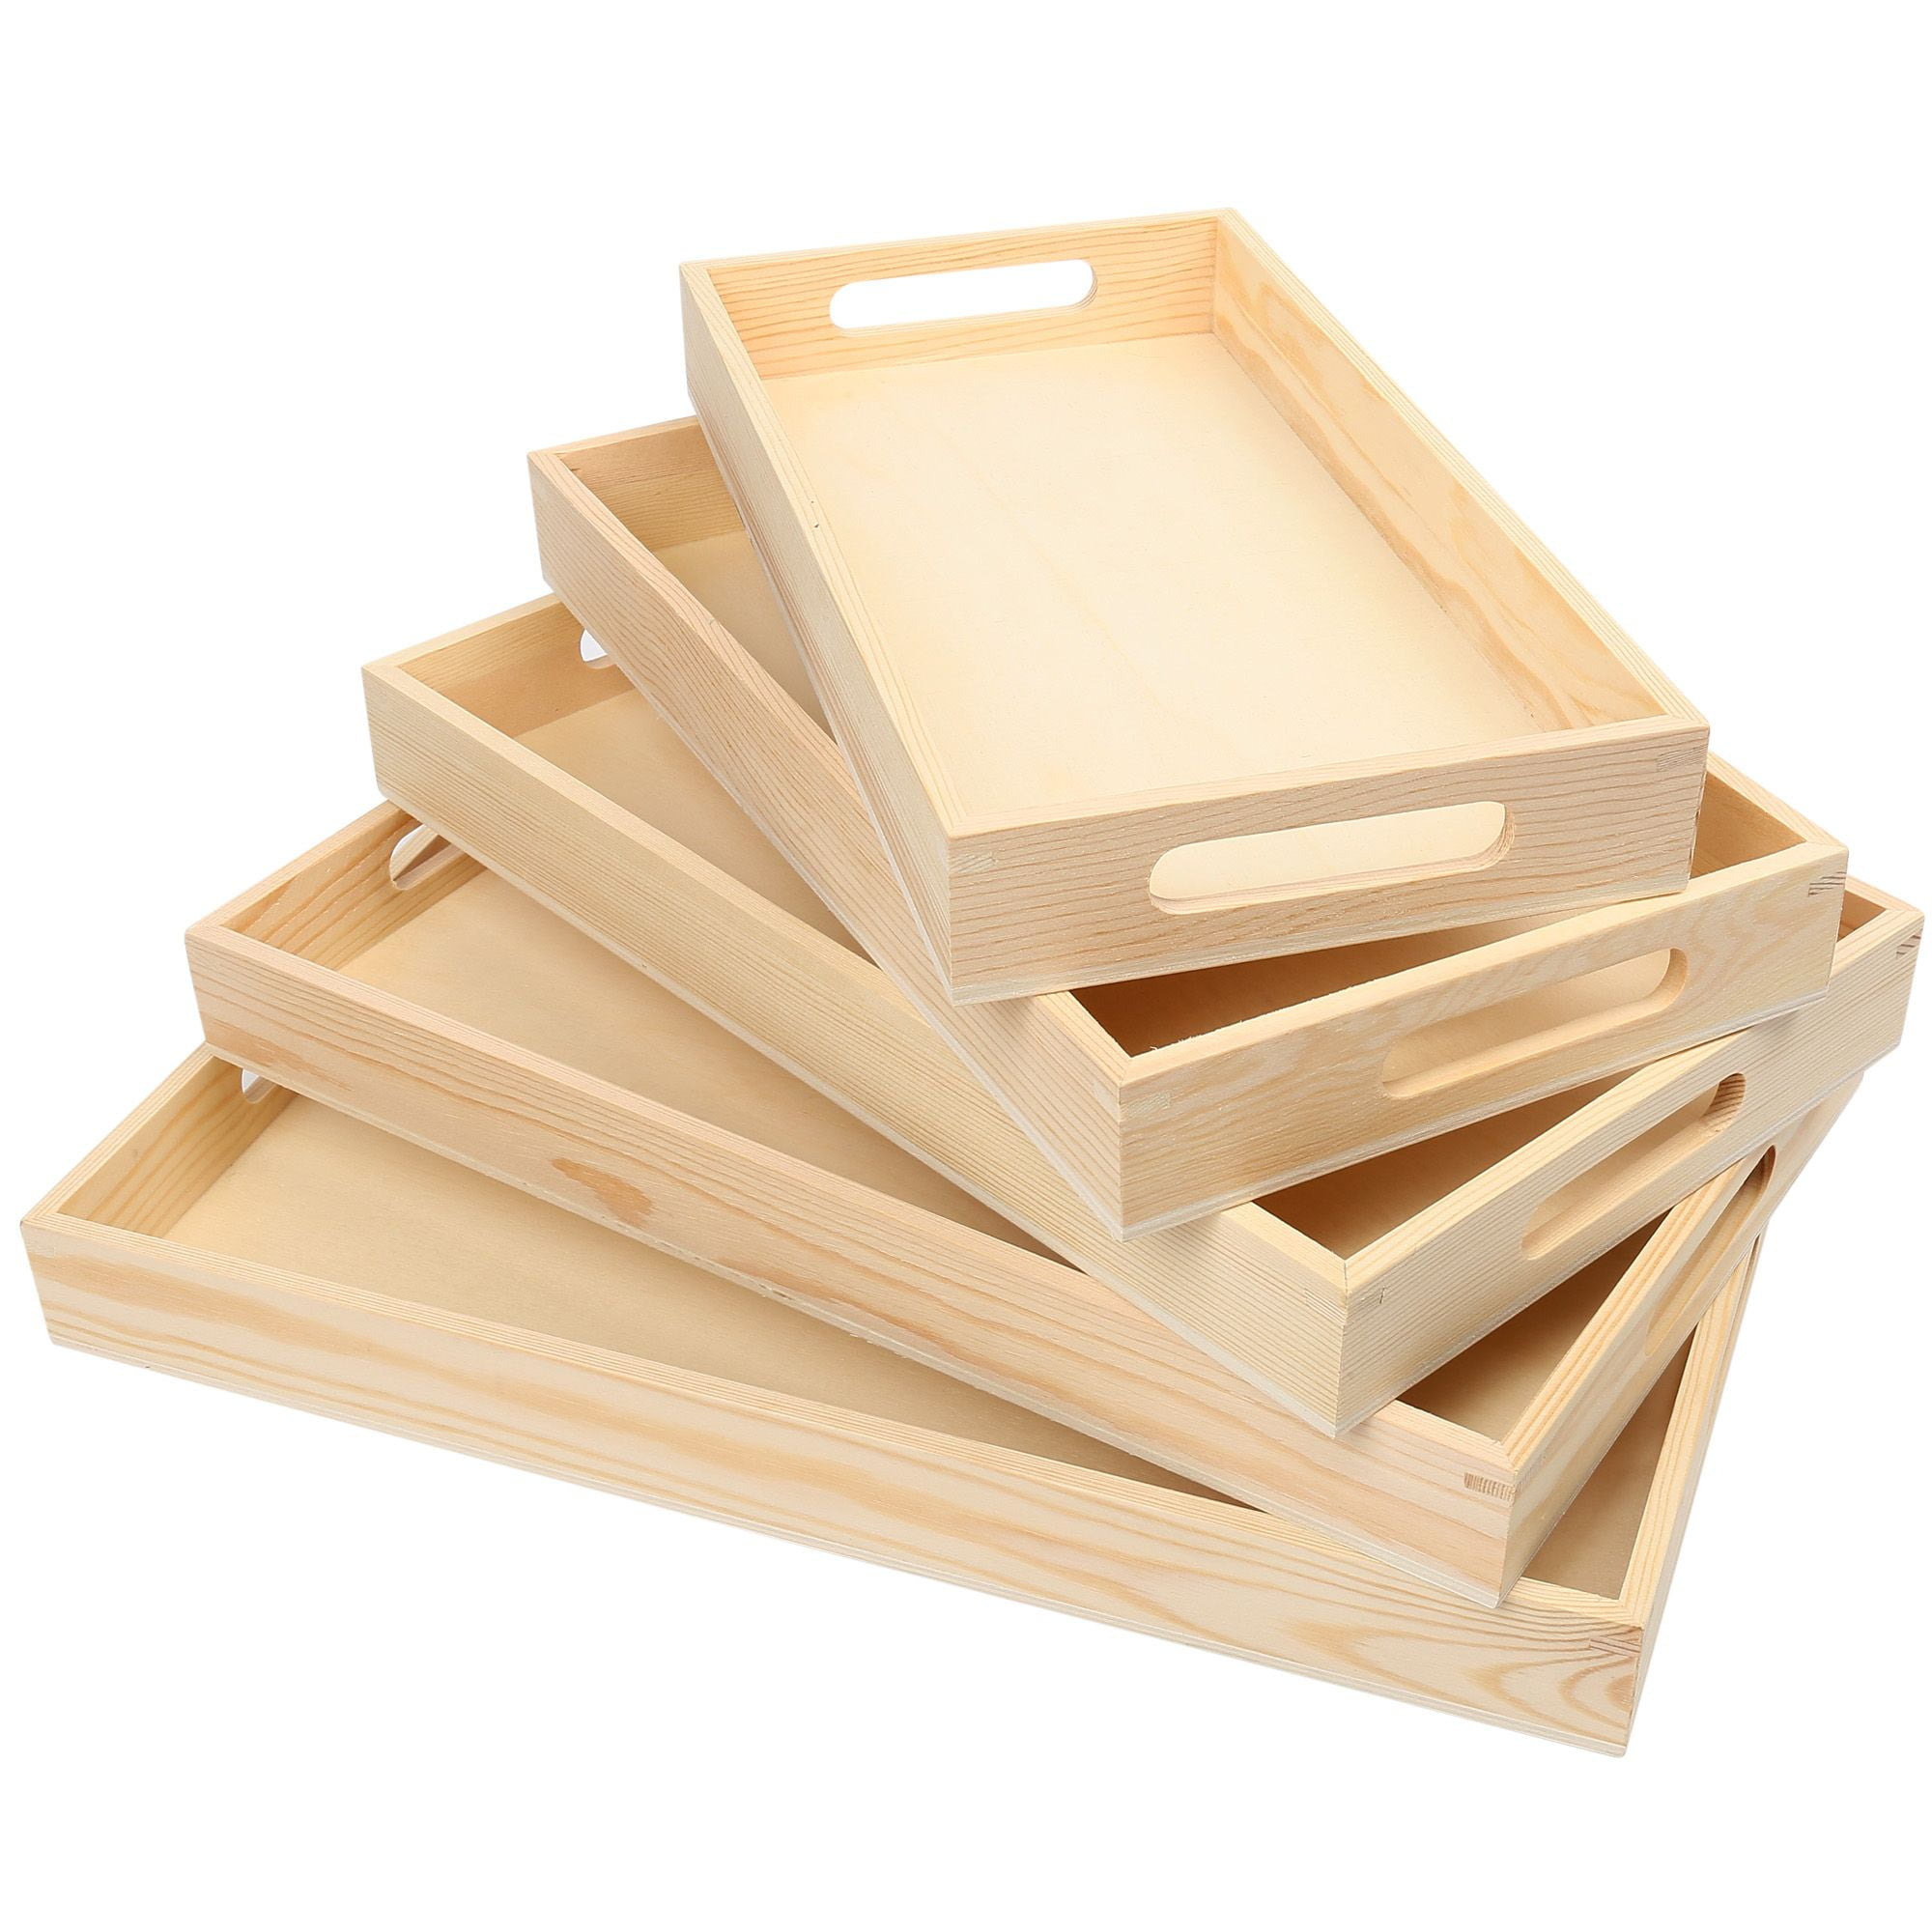 Paintable Wooden Trays W/Handles 5/Pkg-6.625X13To 10.25X16.125